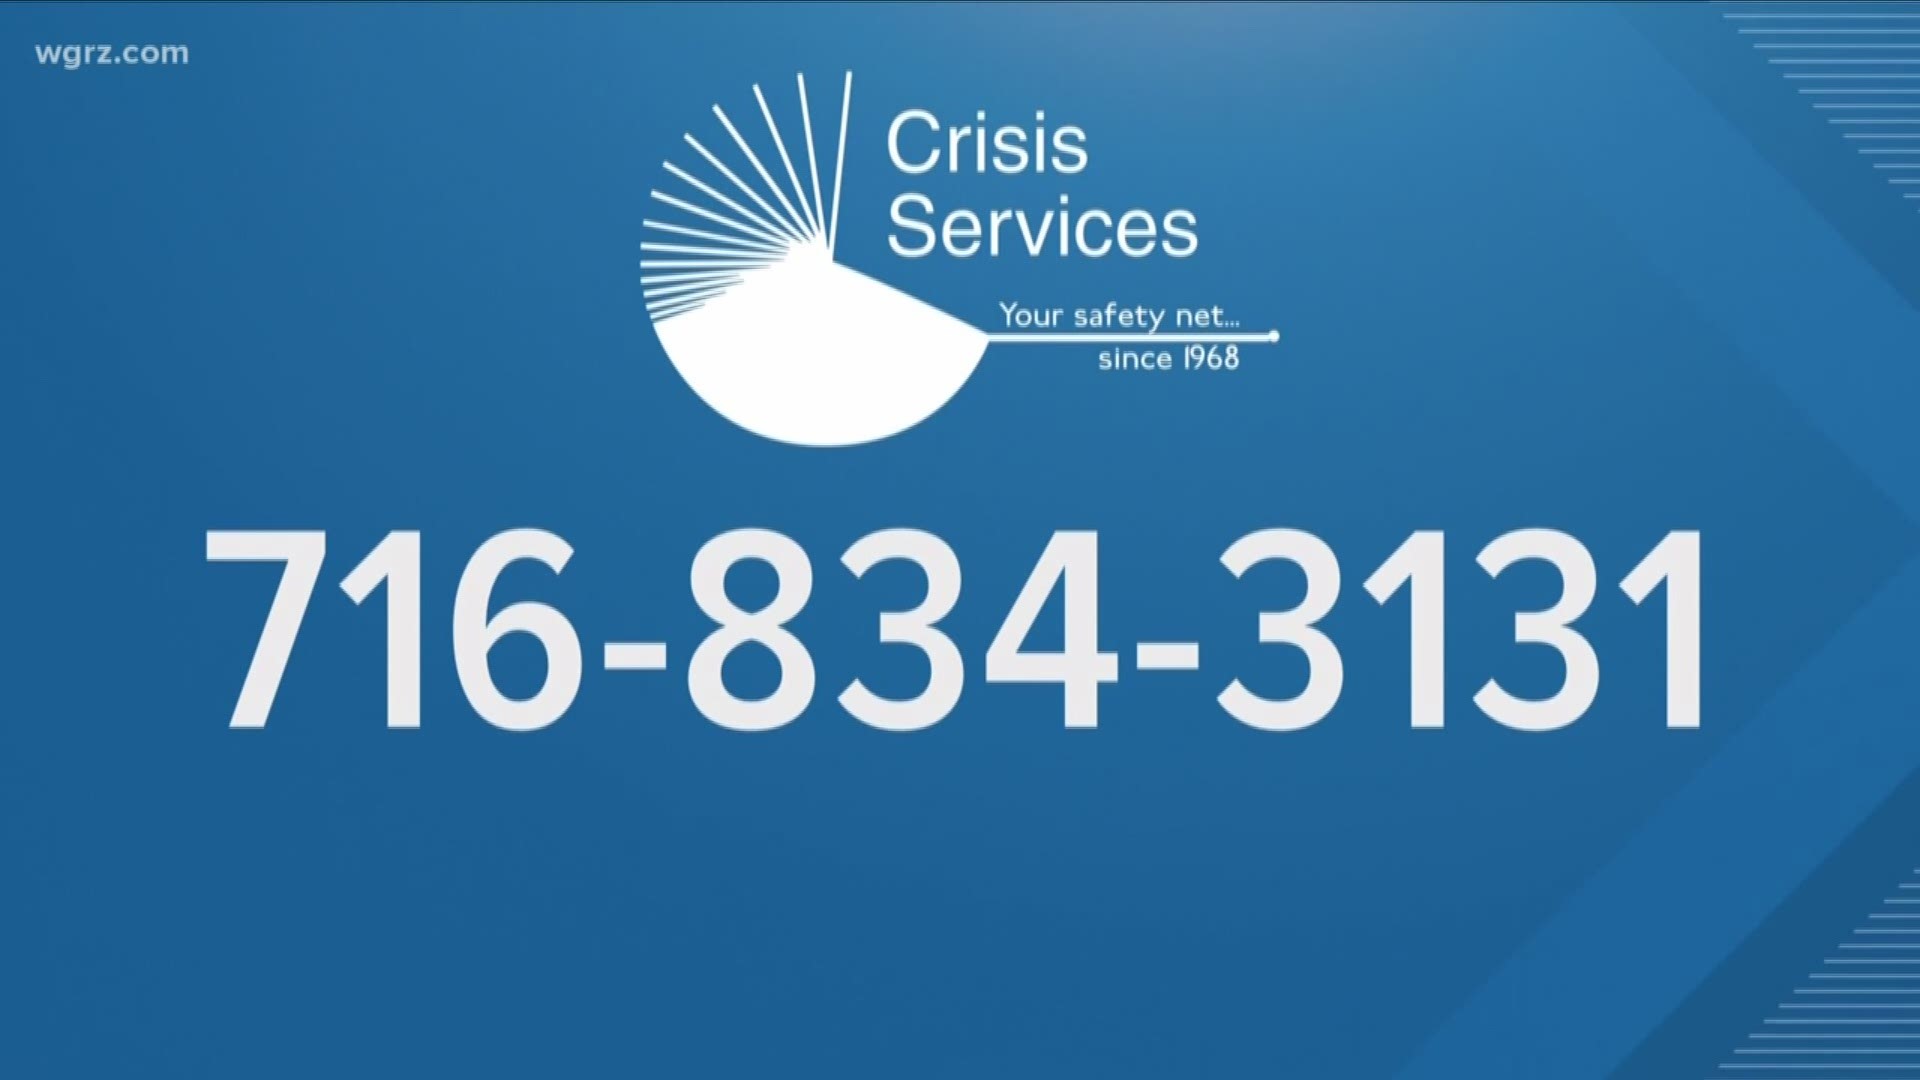 The funding announced on Thursday will help keep the 24-hour Crisis Services hotline running.